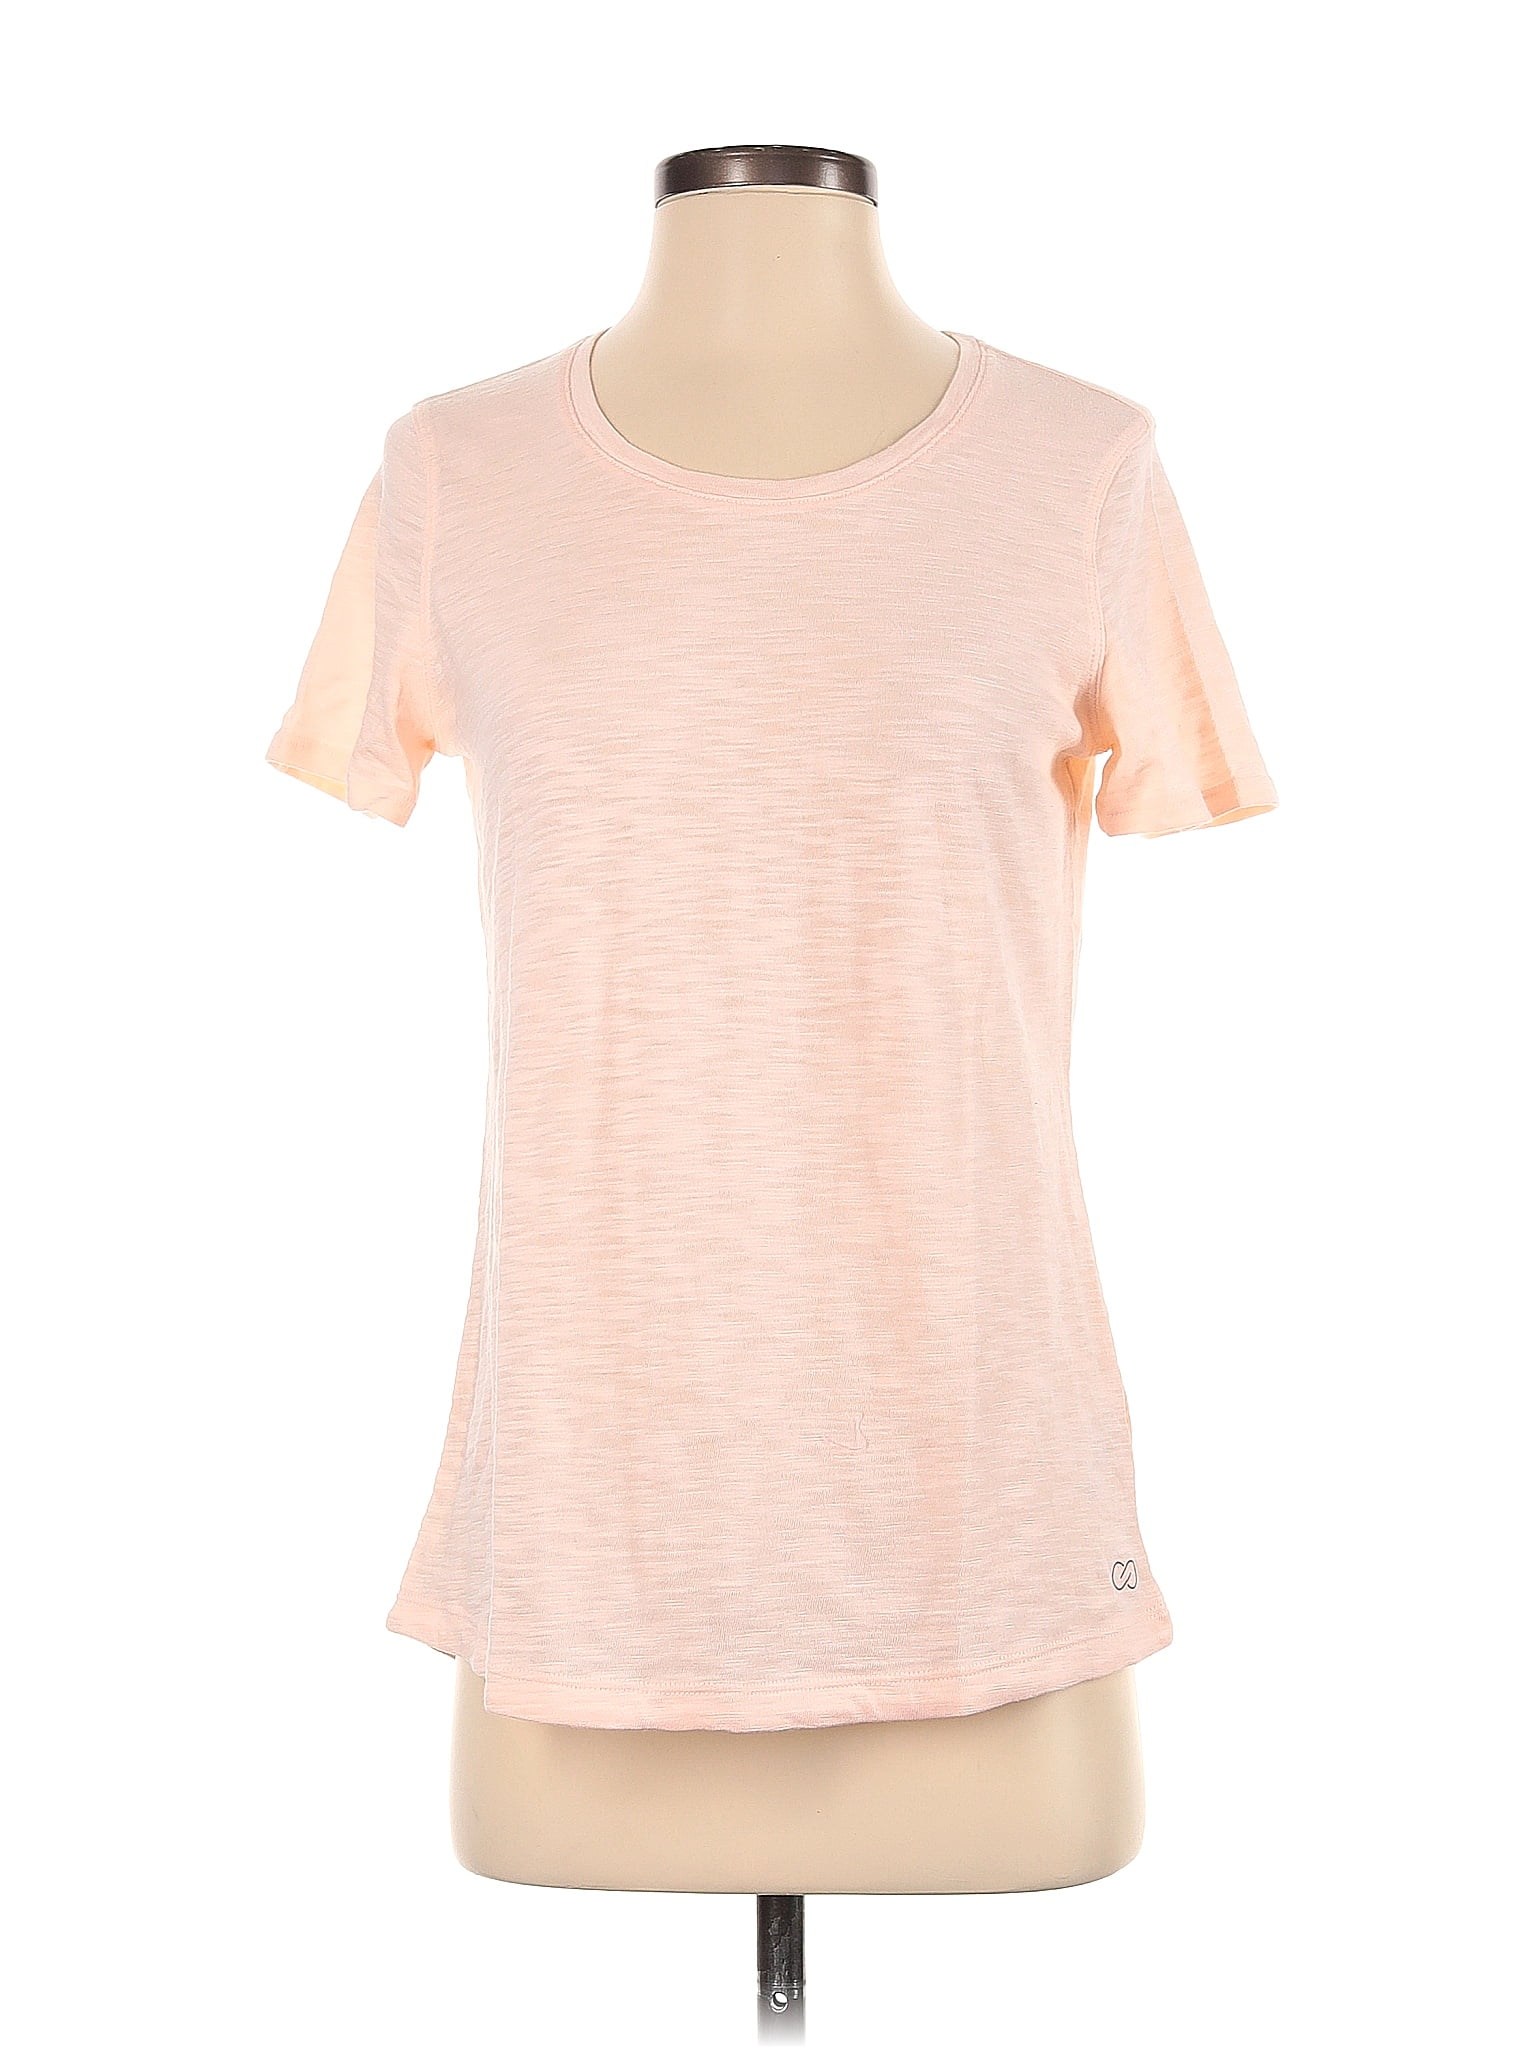 Calia by Carrie Underwood Pink Short Sleeve T-Shirt Size S - 45